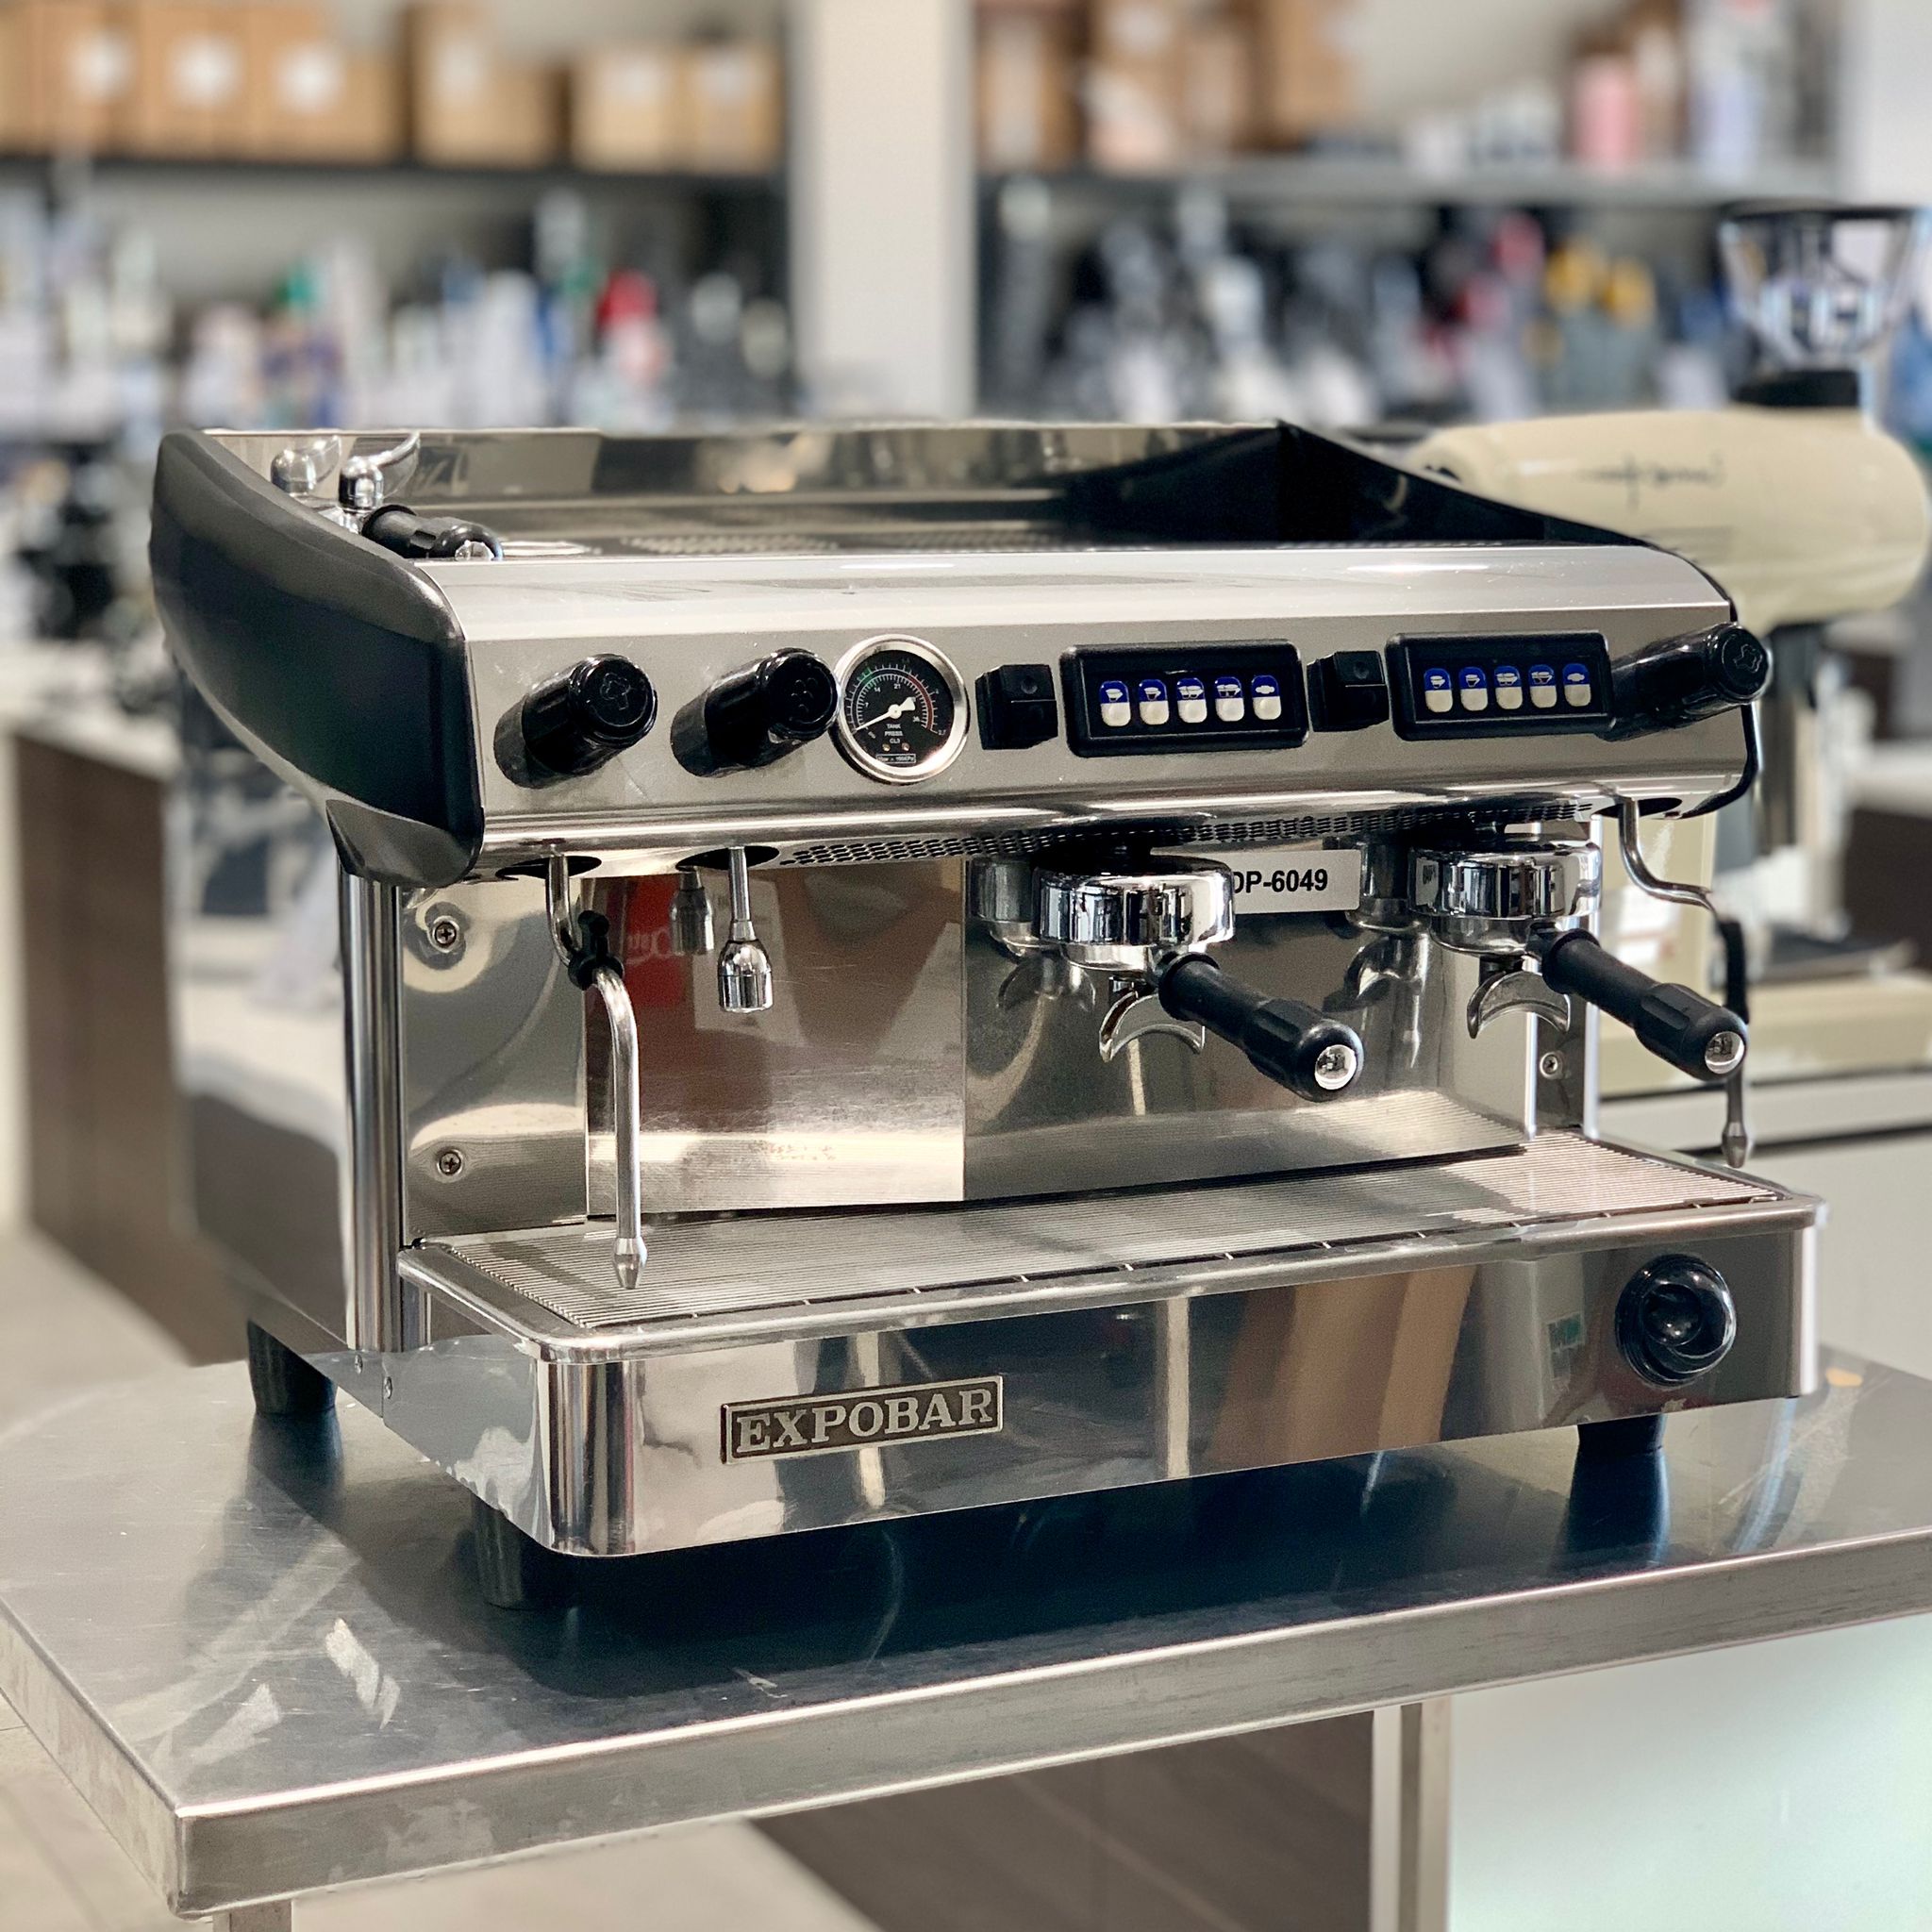 Expobar Cheap Used 2 Group Expobar Commercial Coffee Espresso Machine – New  Zealand - Di Pacci